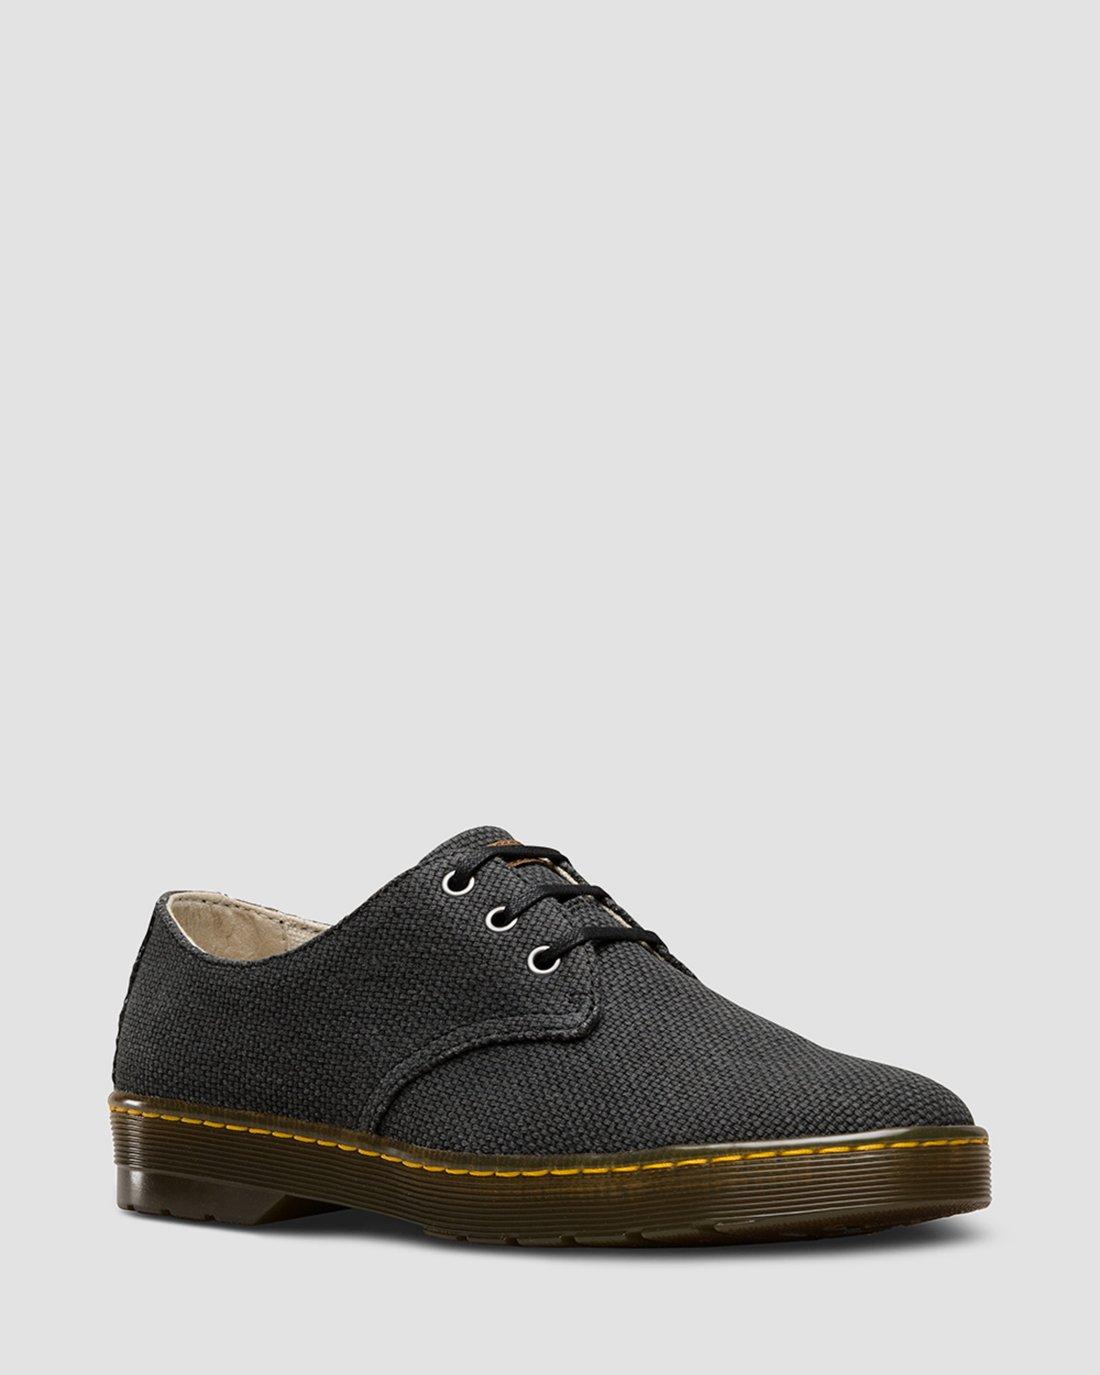 DELRAY MILITARY CANVAS | Dr. Martens UK